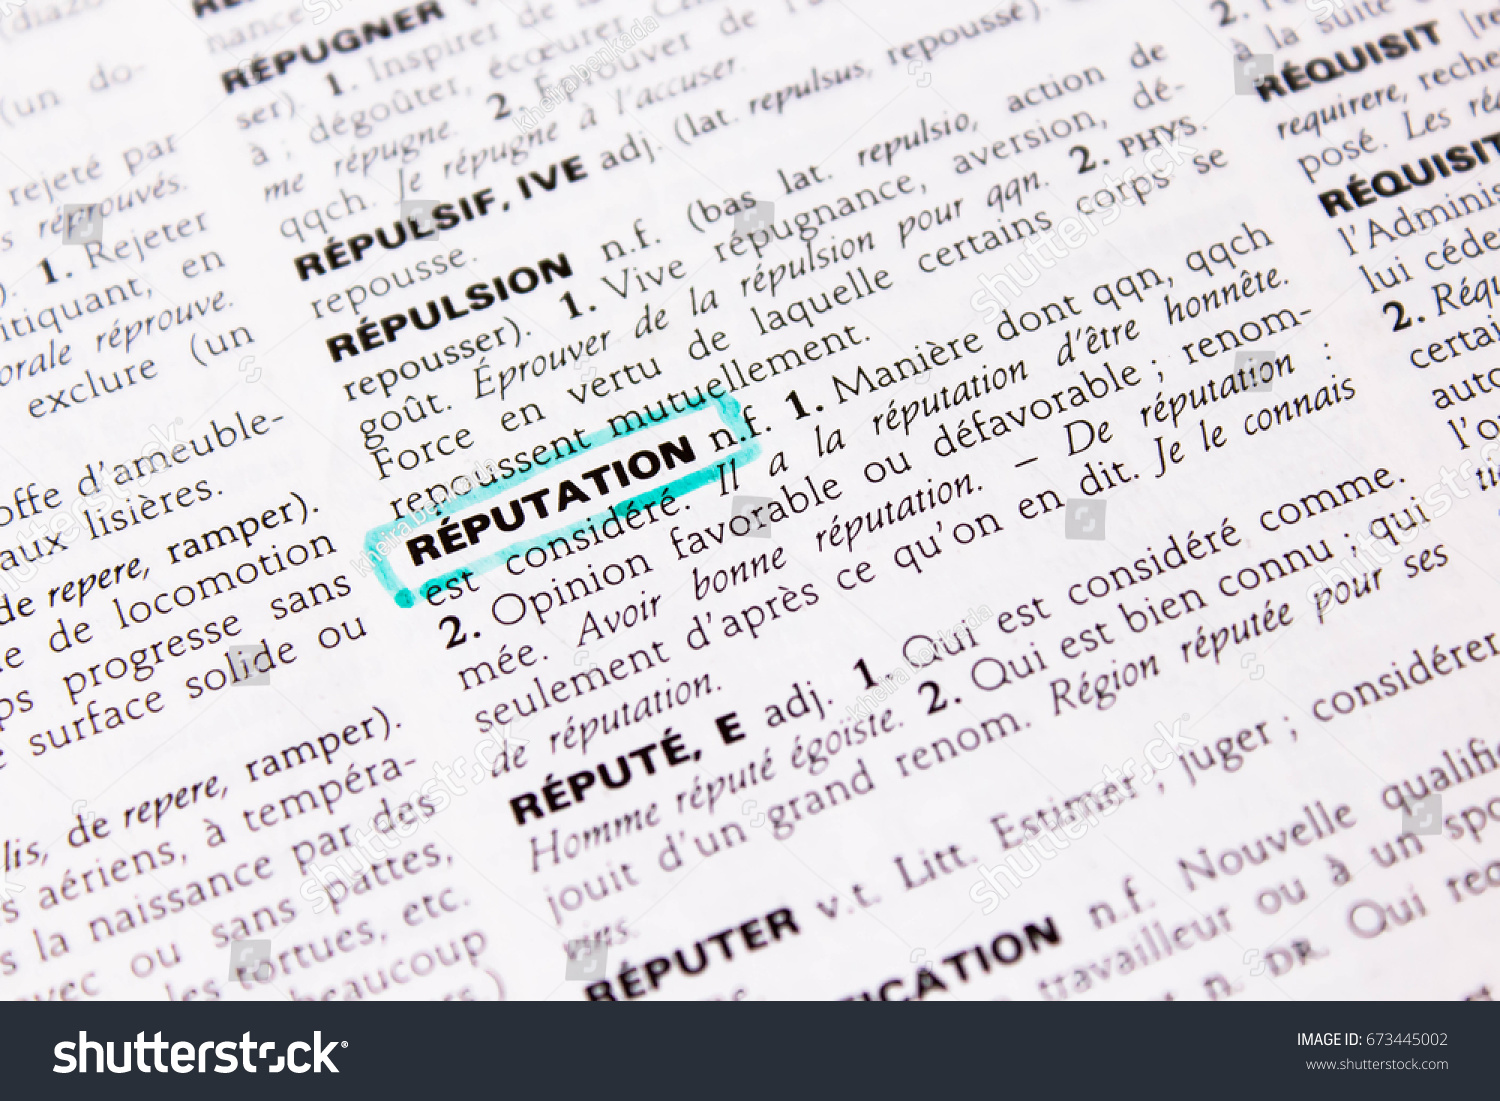 definition reputation dictionary stock photo (edit now) 673445002